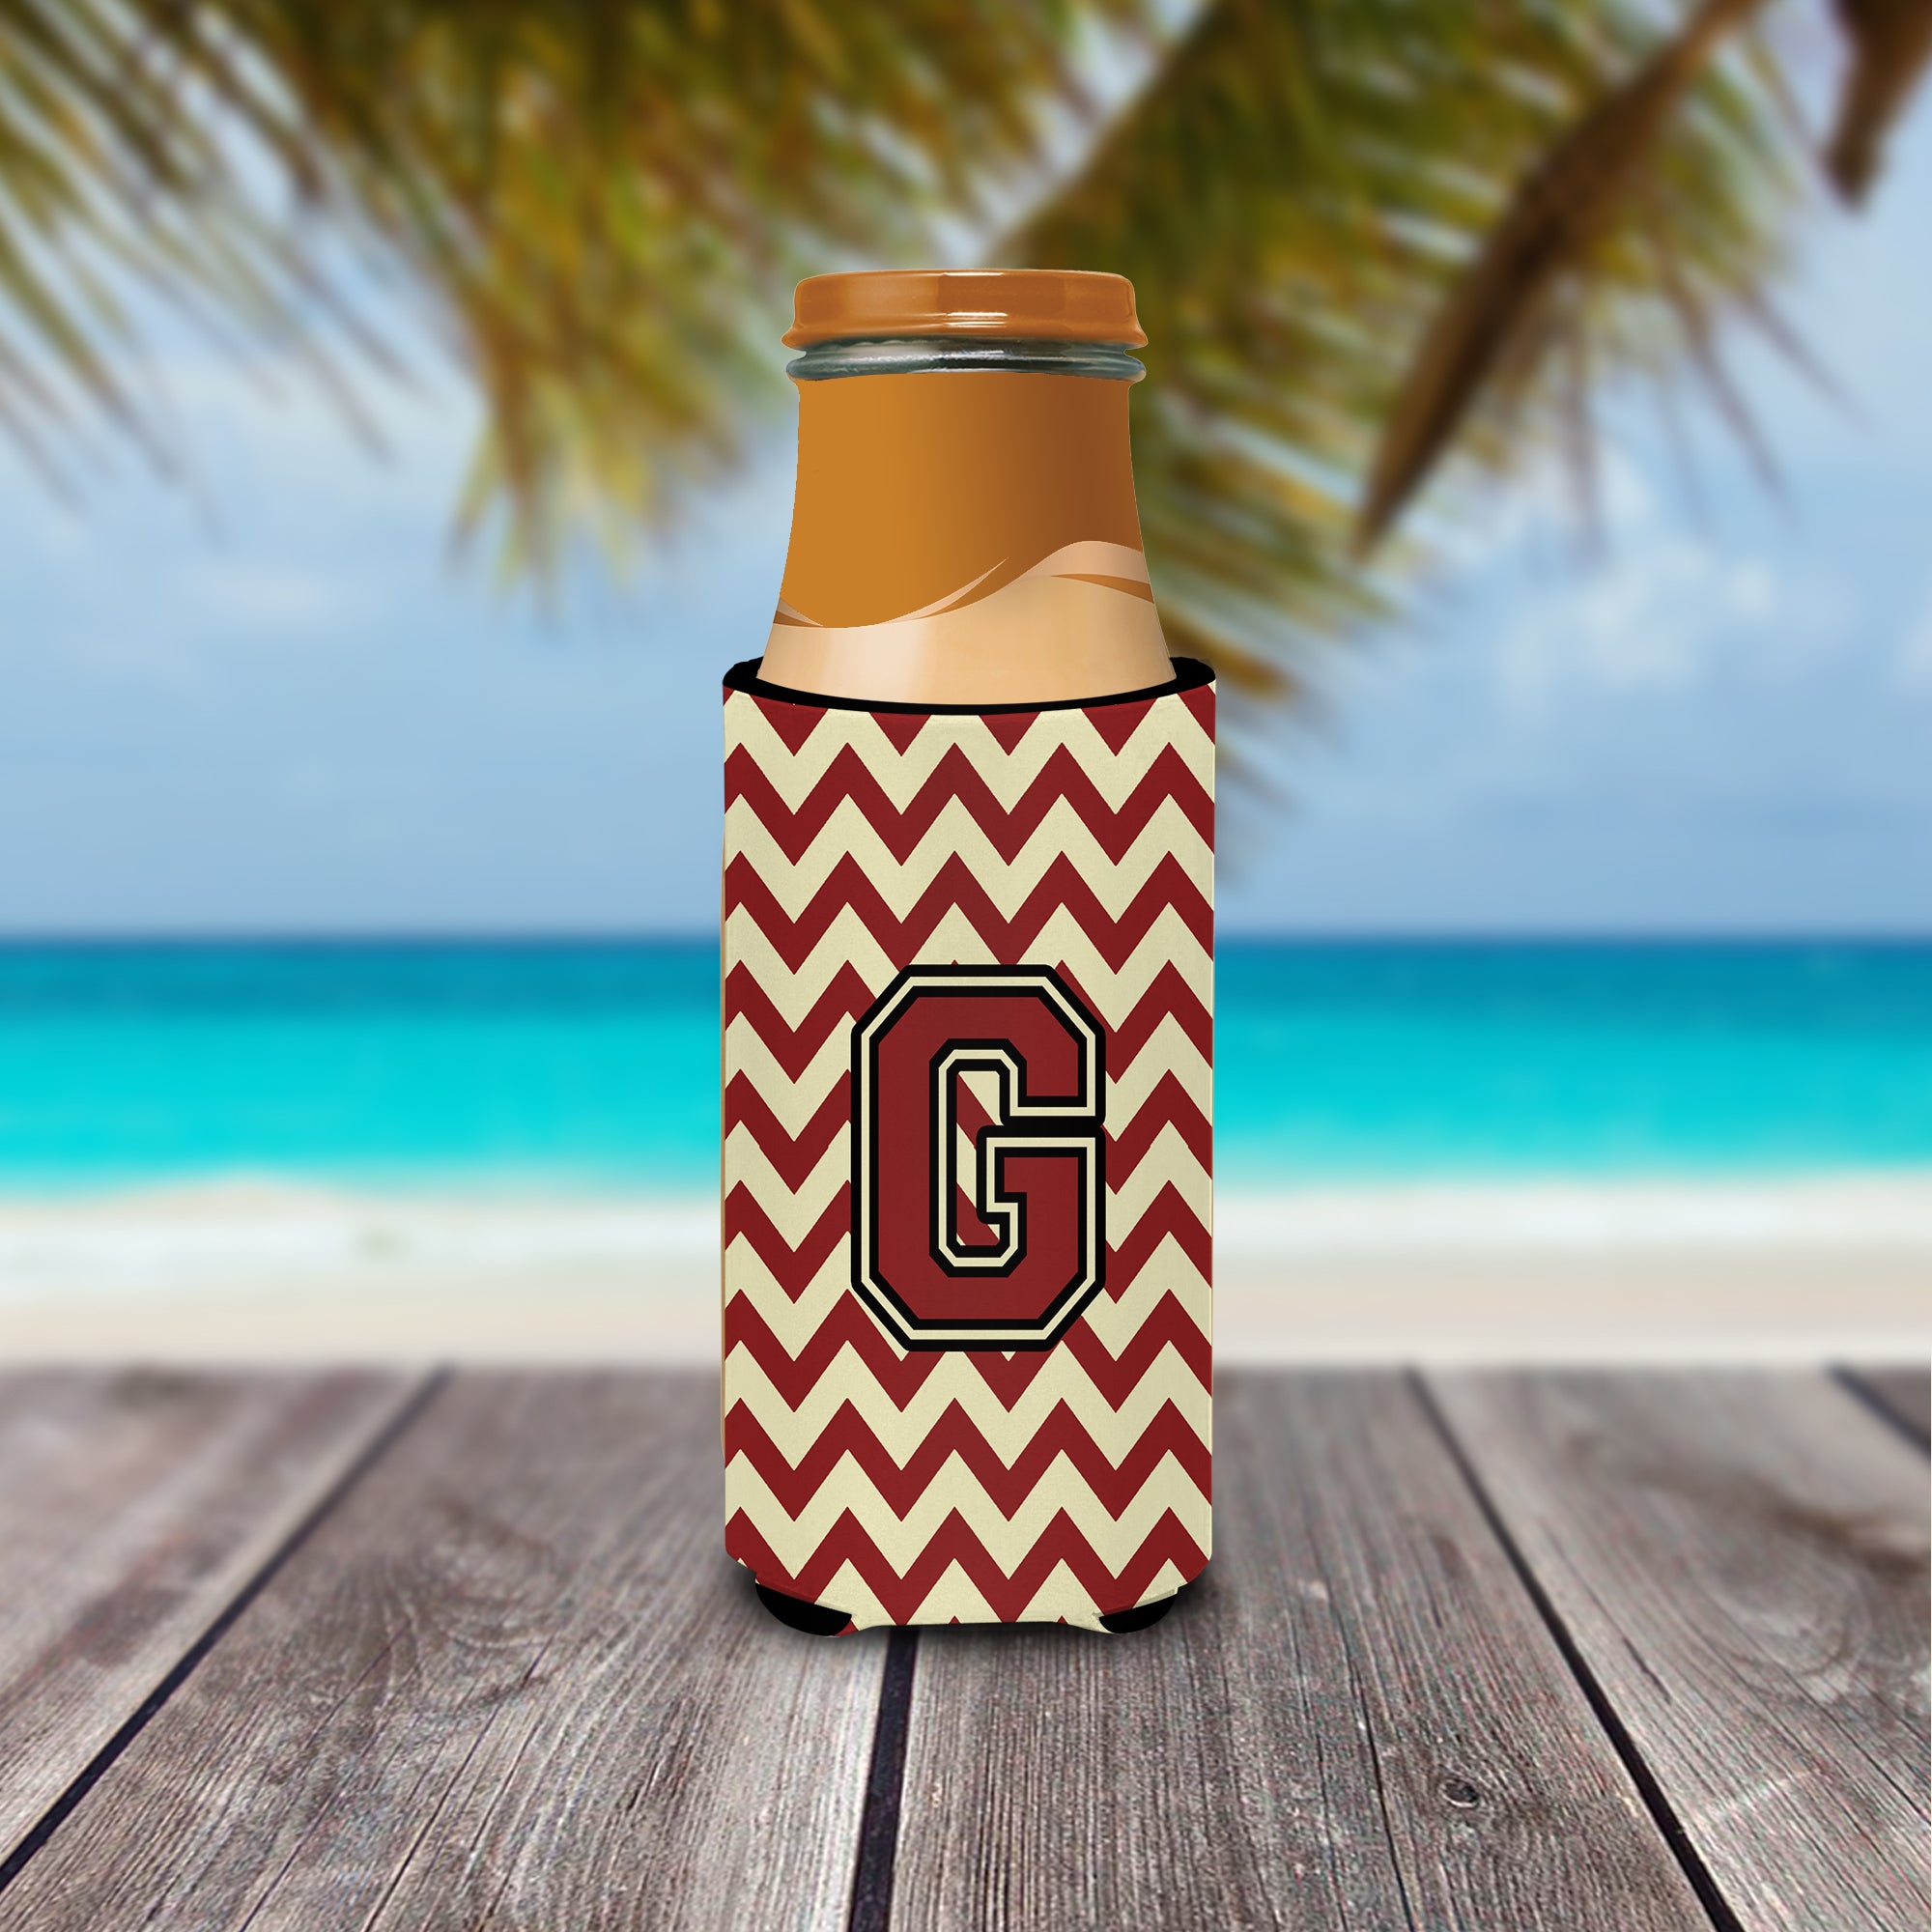 Letter G Chevron Maroon and Gold Ultra Beverage Insulators for slim cans CJ1061-GMUK